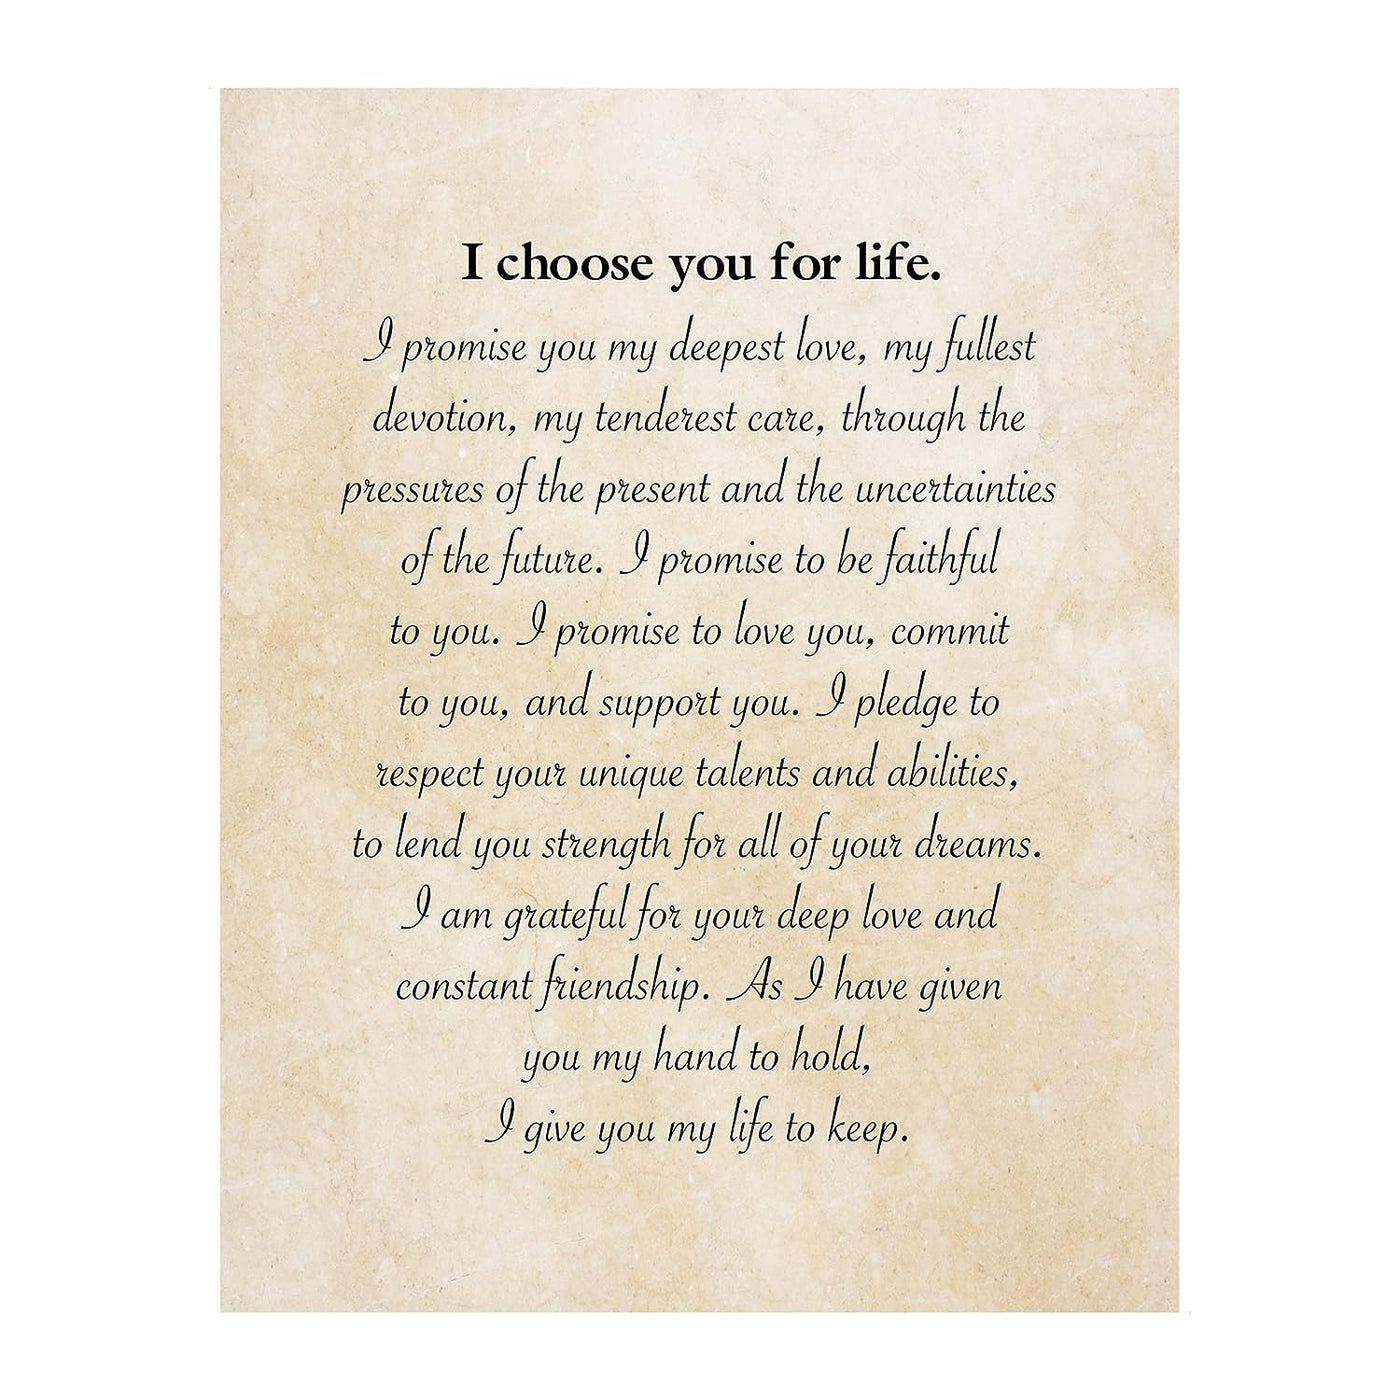 I Choose You for Life-Inspirational Wall Art -11 x 14" Love & Marriage Print w/Replica Parchment Design-Ready to Frame. Perfect for Spouse-Life Partners. Great Engagement-Wedding-Anniversary Gift!